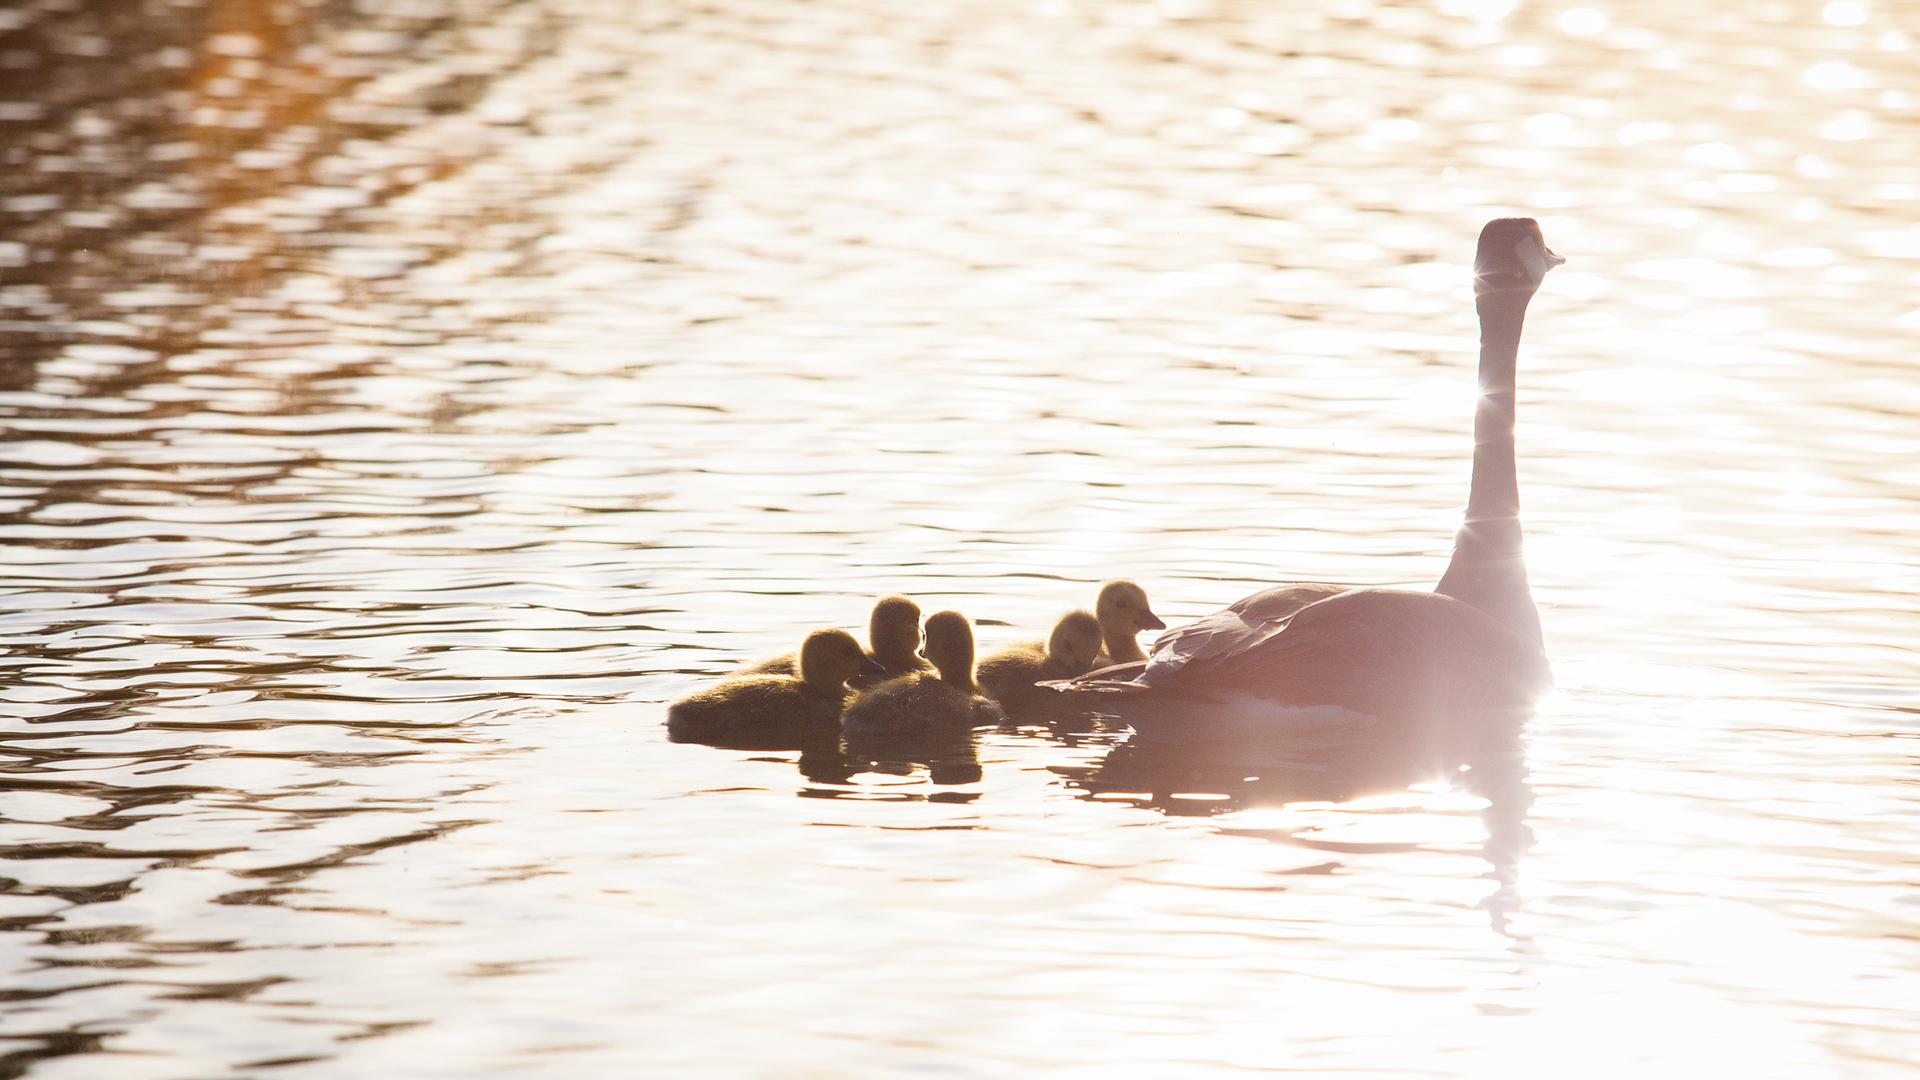 geese, Goose, Babies, Baby, Chick, Chicks, Reflection, Lakes, Birds, Bird Wallpaper